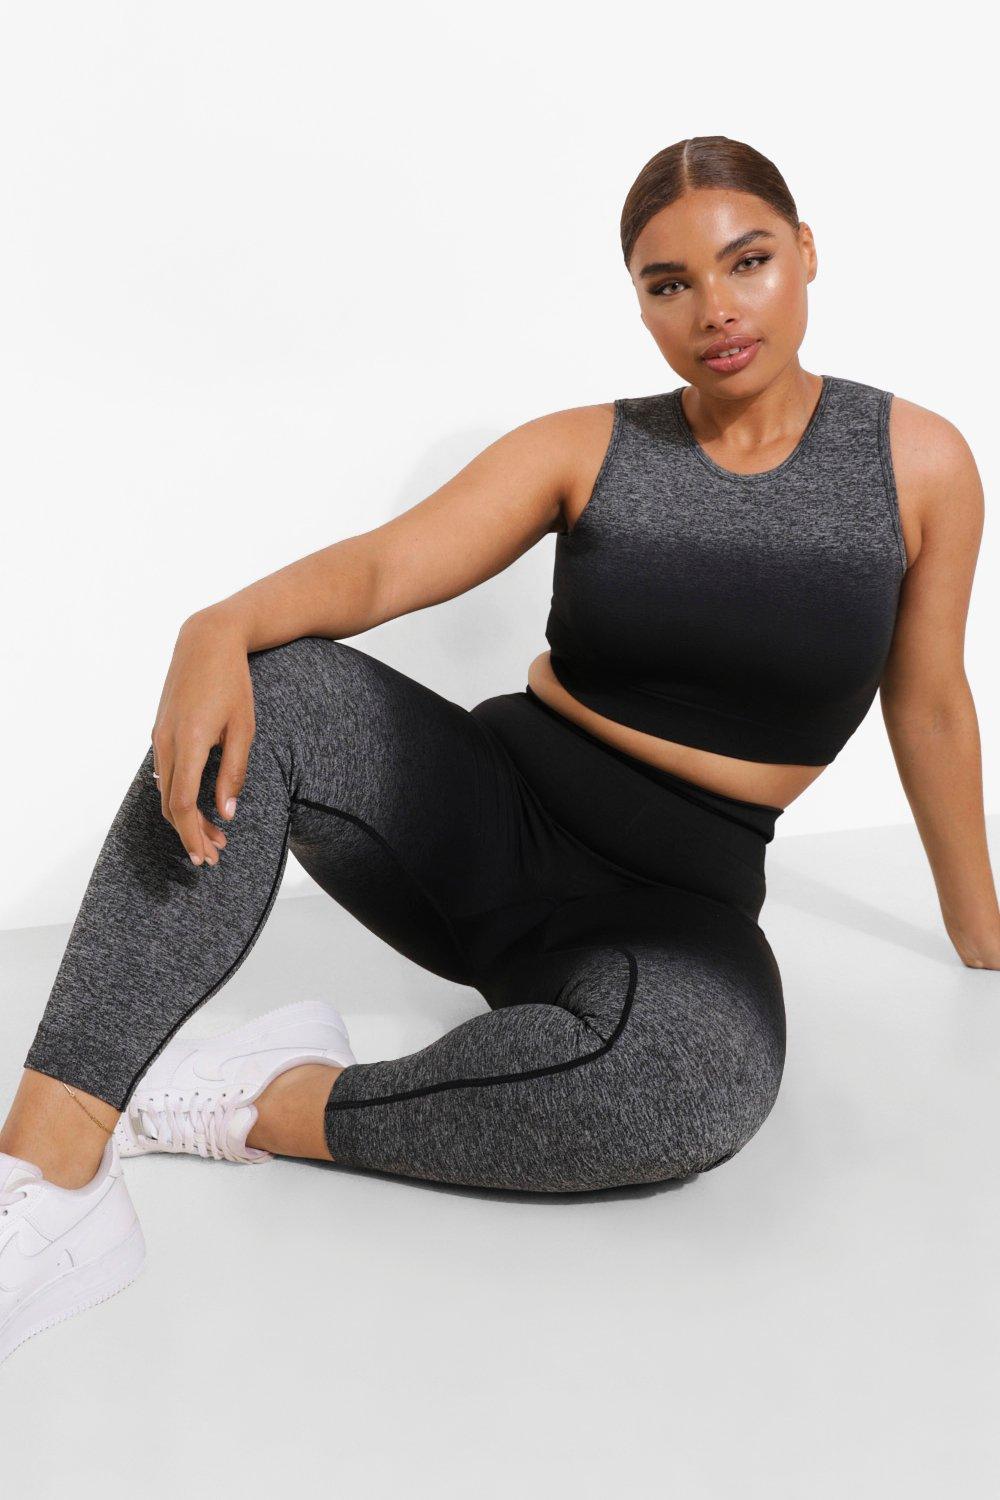 Buy Women's Crop Top & Workout Leggings Ombre Activewear Yoga and